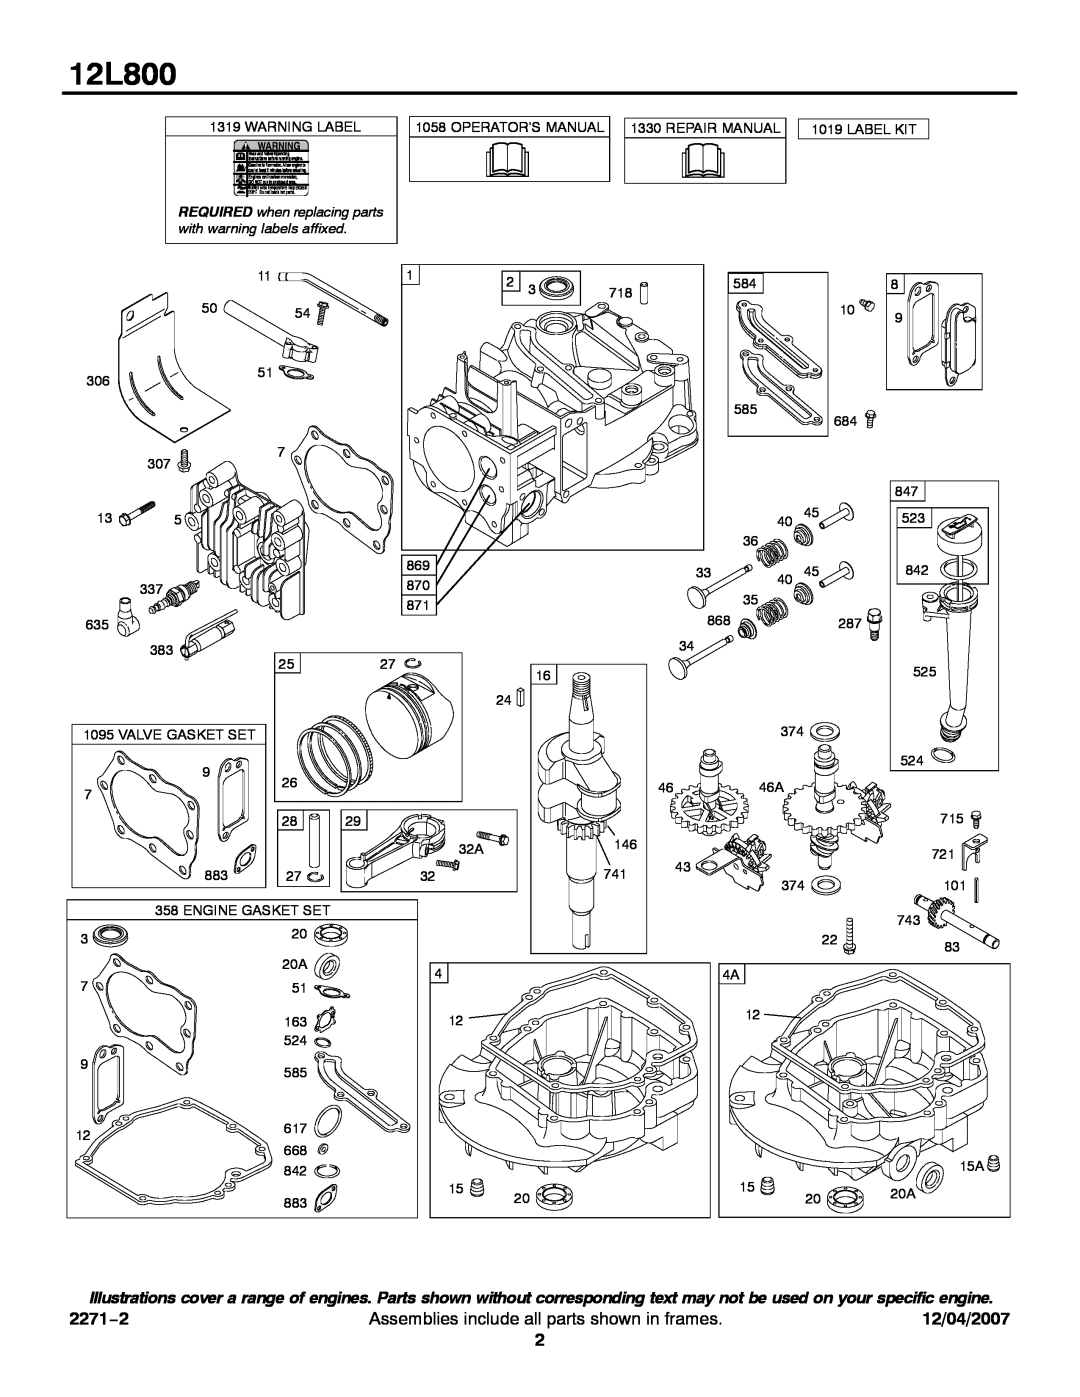 Briggs & Stratton 12L800 service manual 2271−2, Assemblies include all parts shown in frames, 12/04/2007 